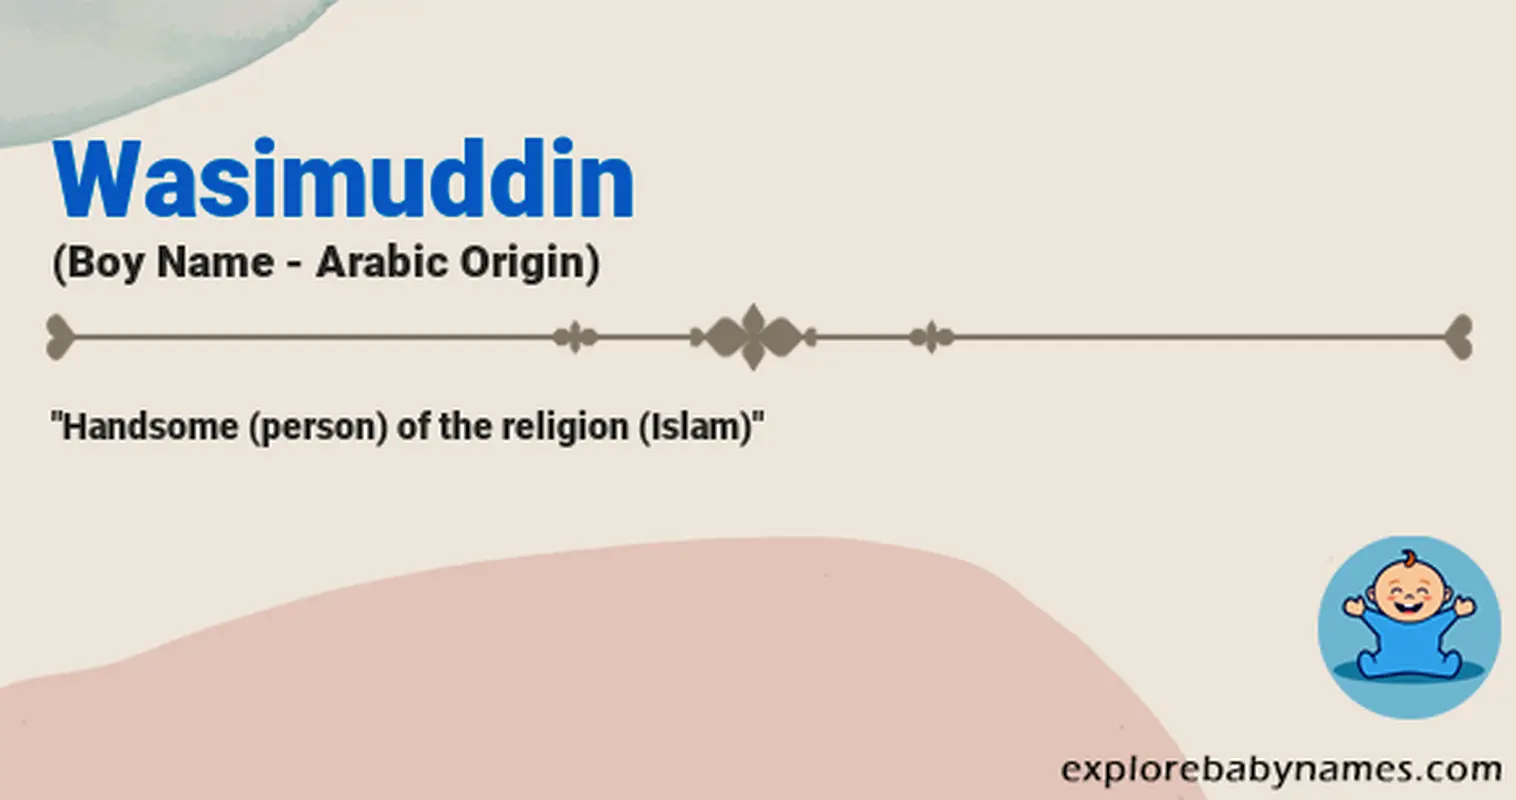 Meaning of Wasimuddin